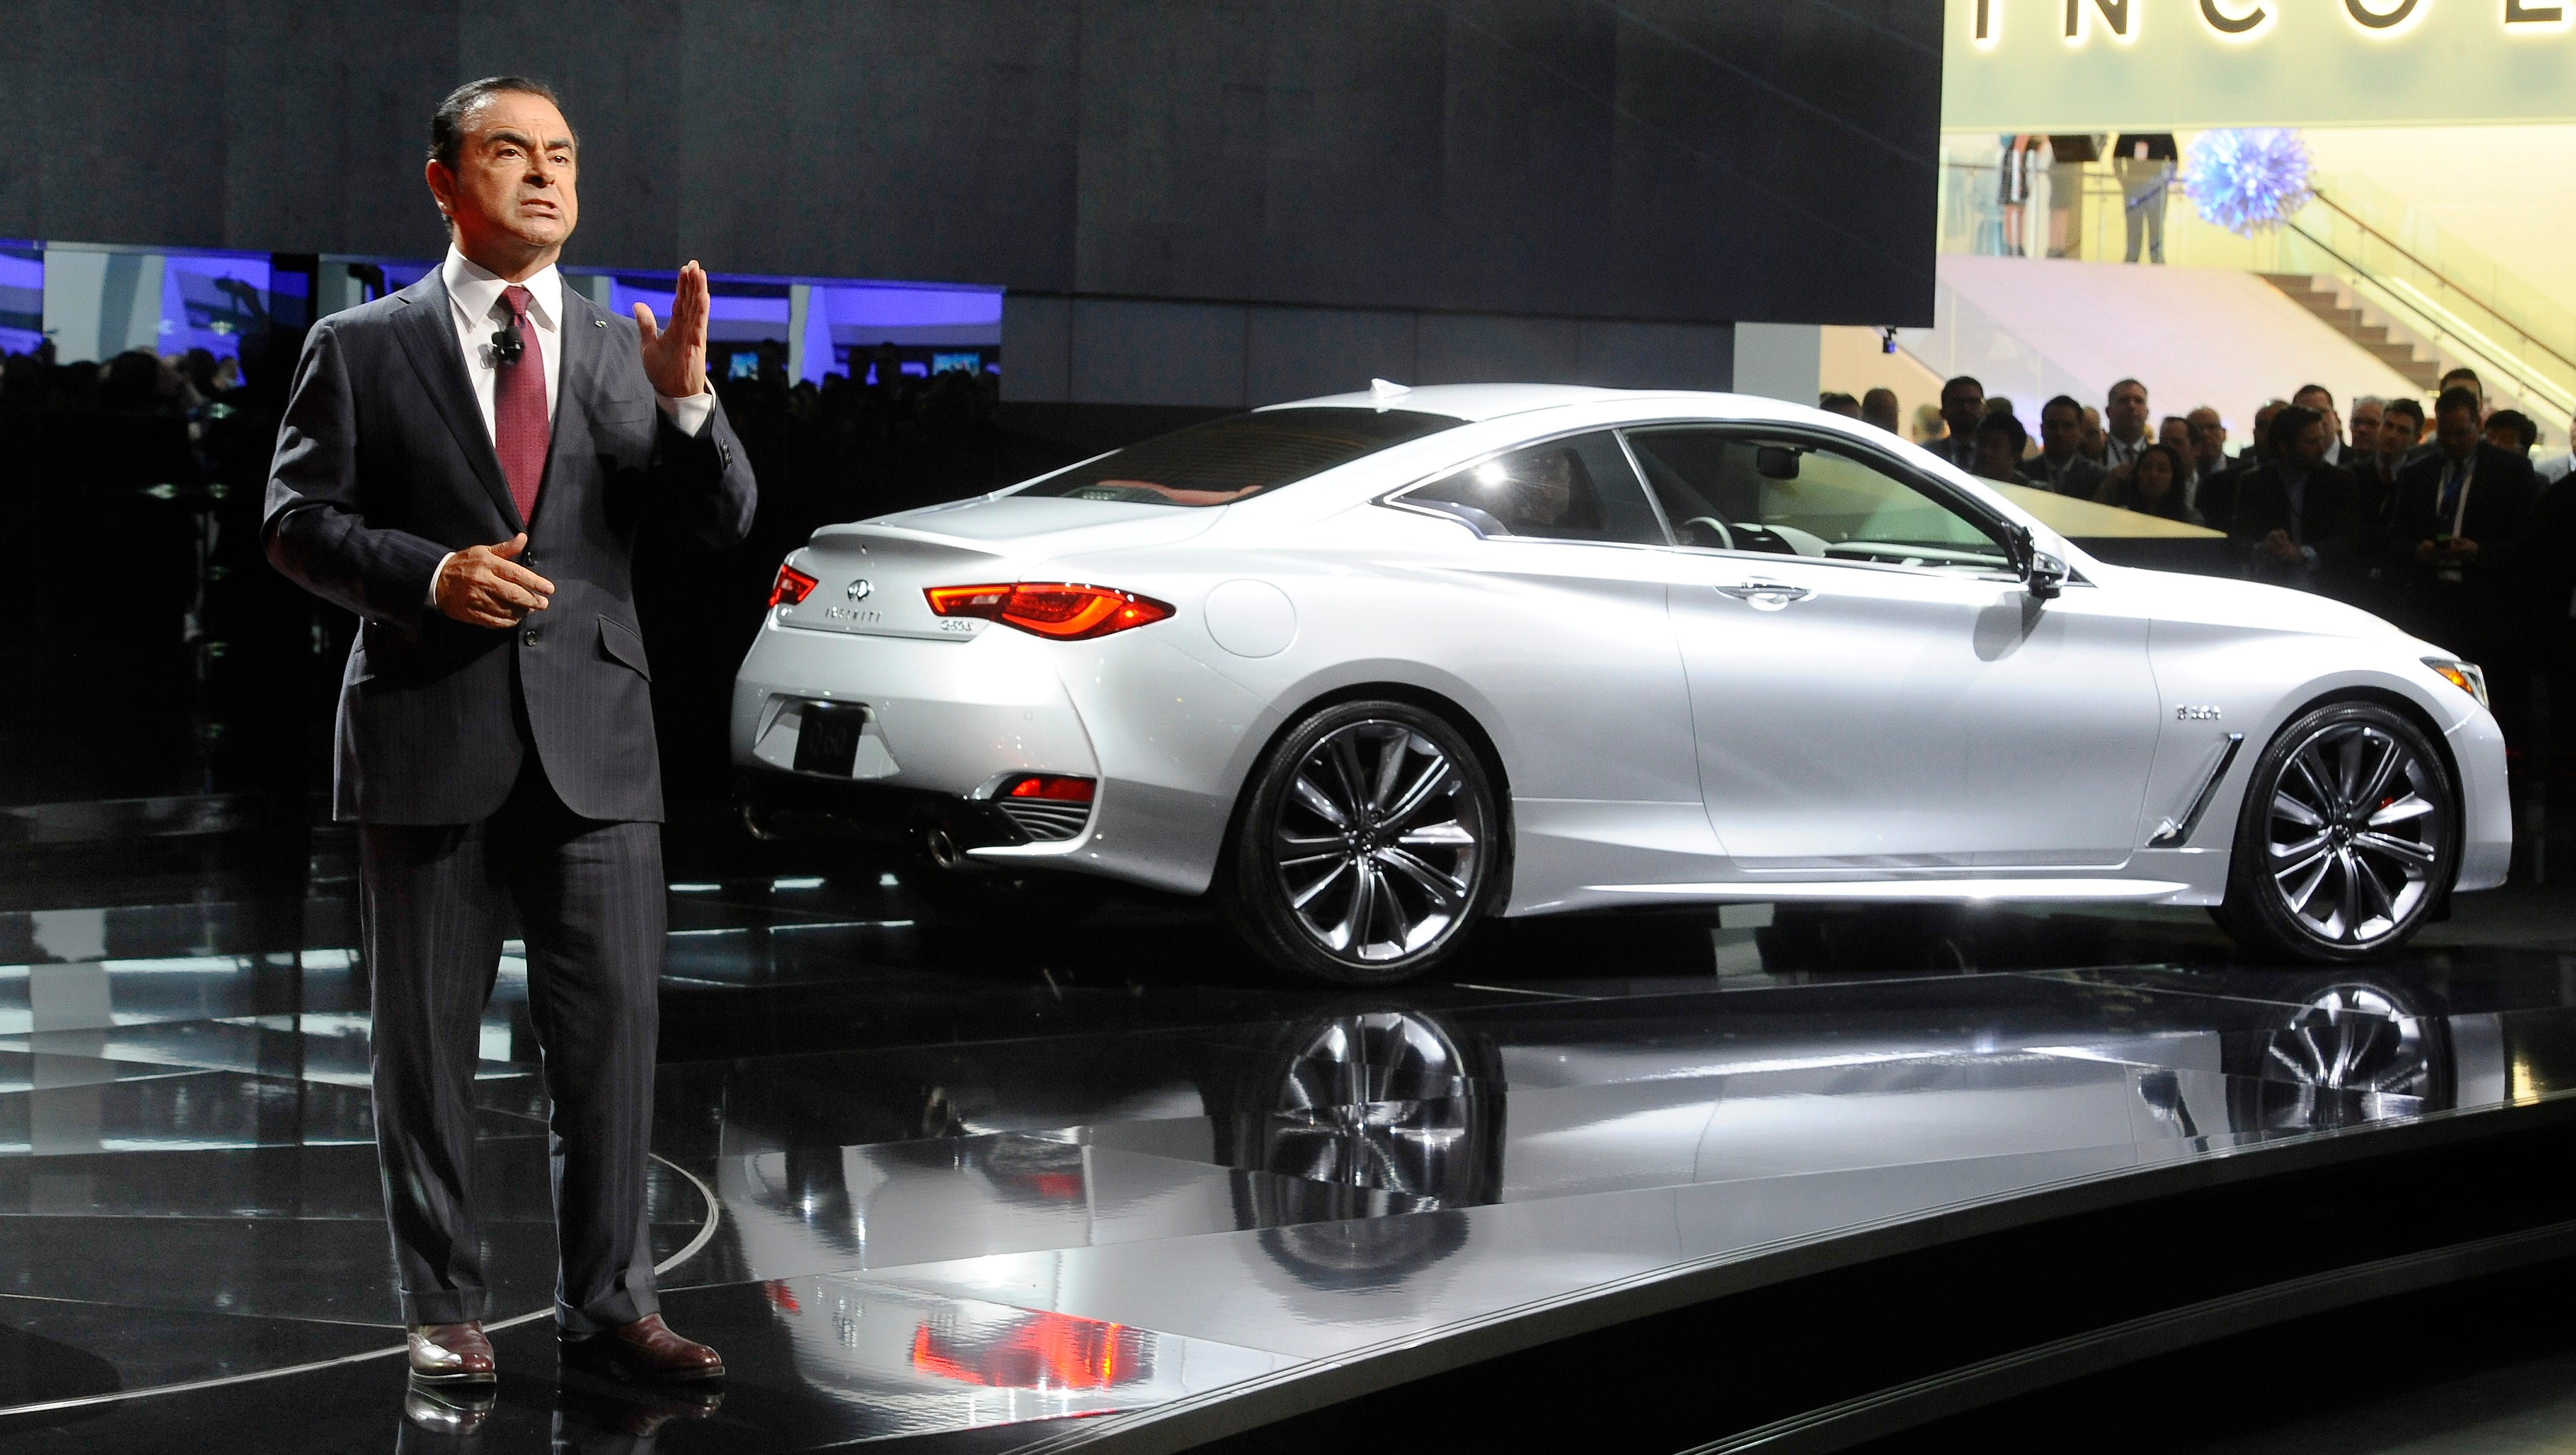 Nissan Motor’s chairman Carlos Ghosn, seen here introducing the Infiniti Q60, has been arrested and will be dismissed for alleged under-reporting of his income and misuse of company funds, the company said Monday.